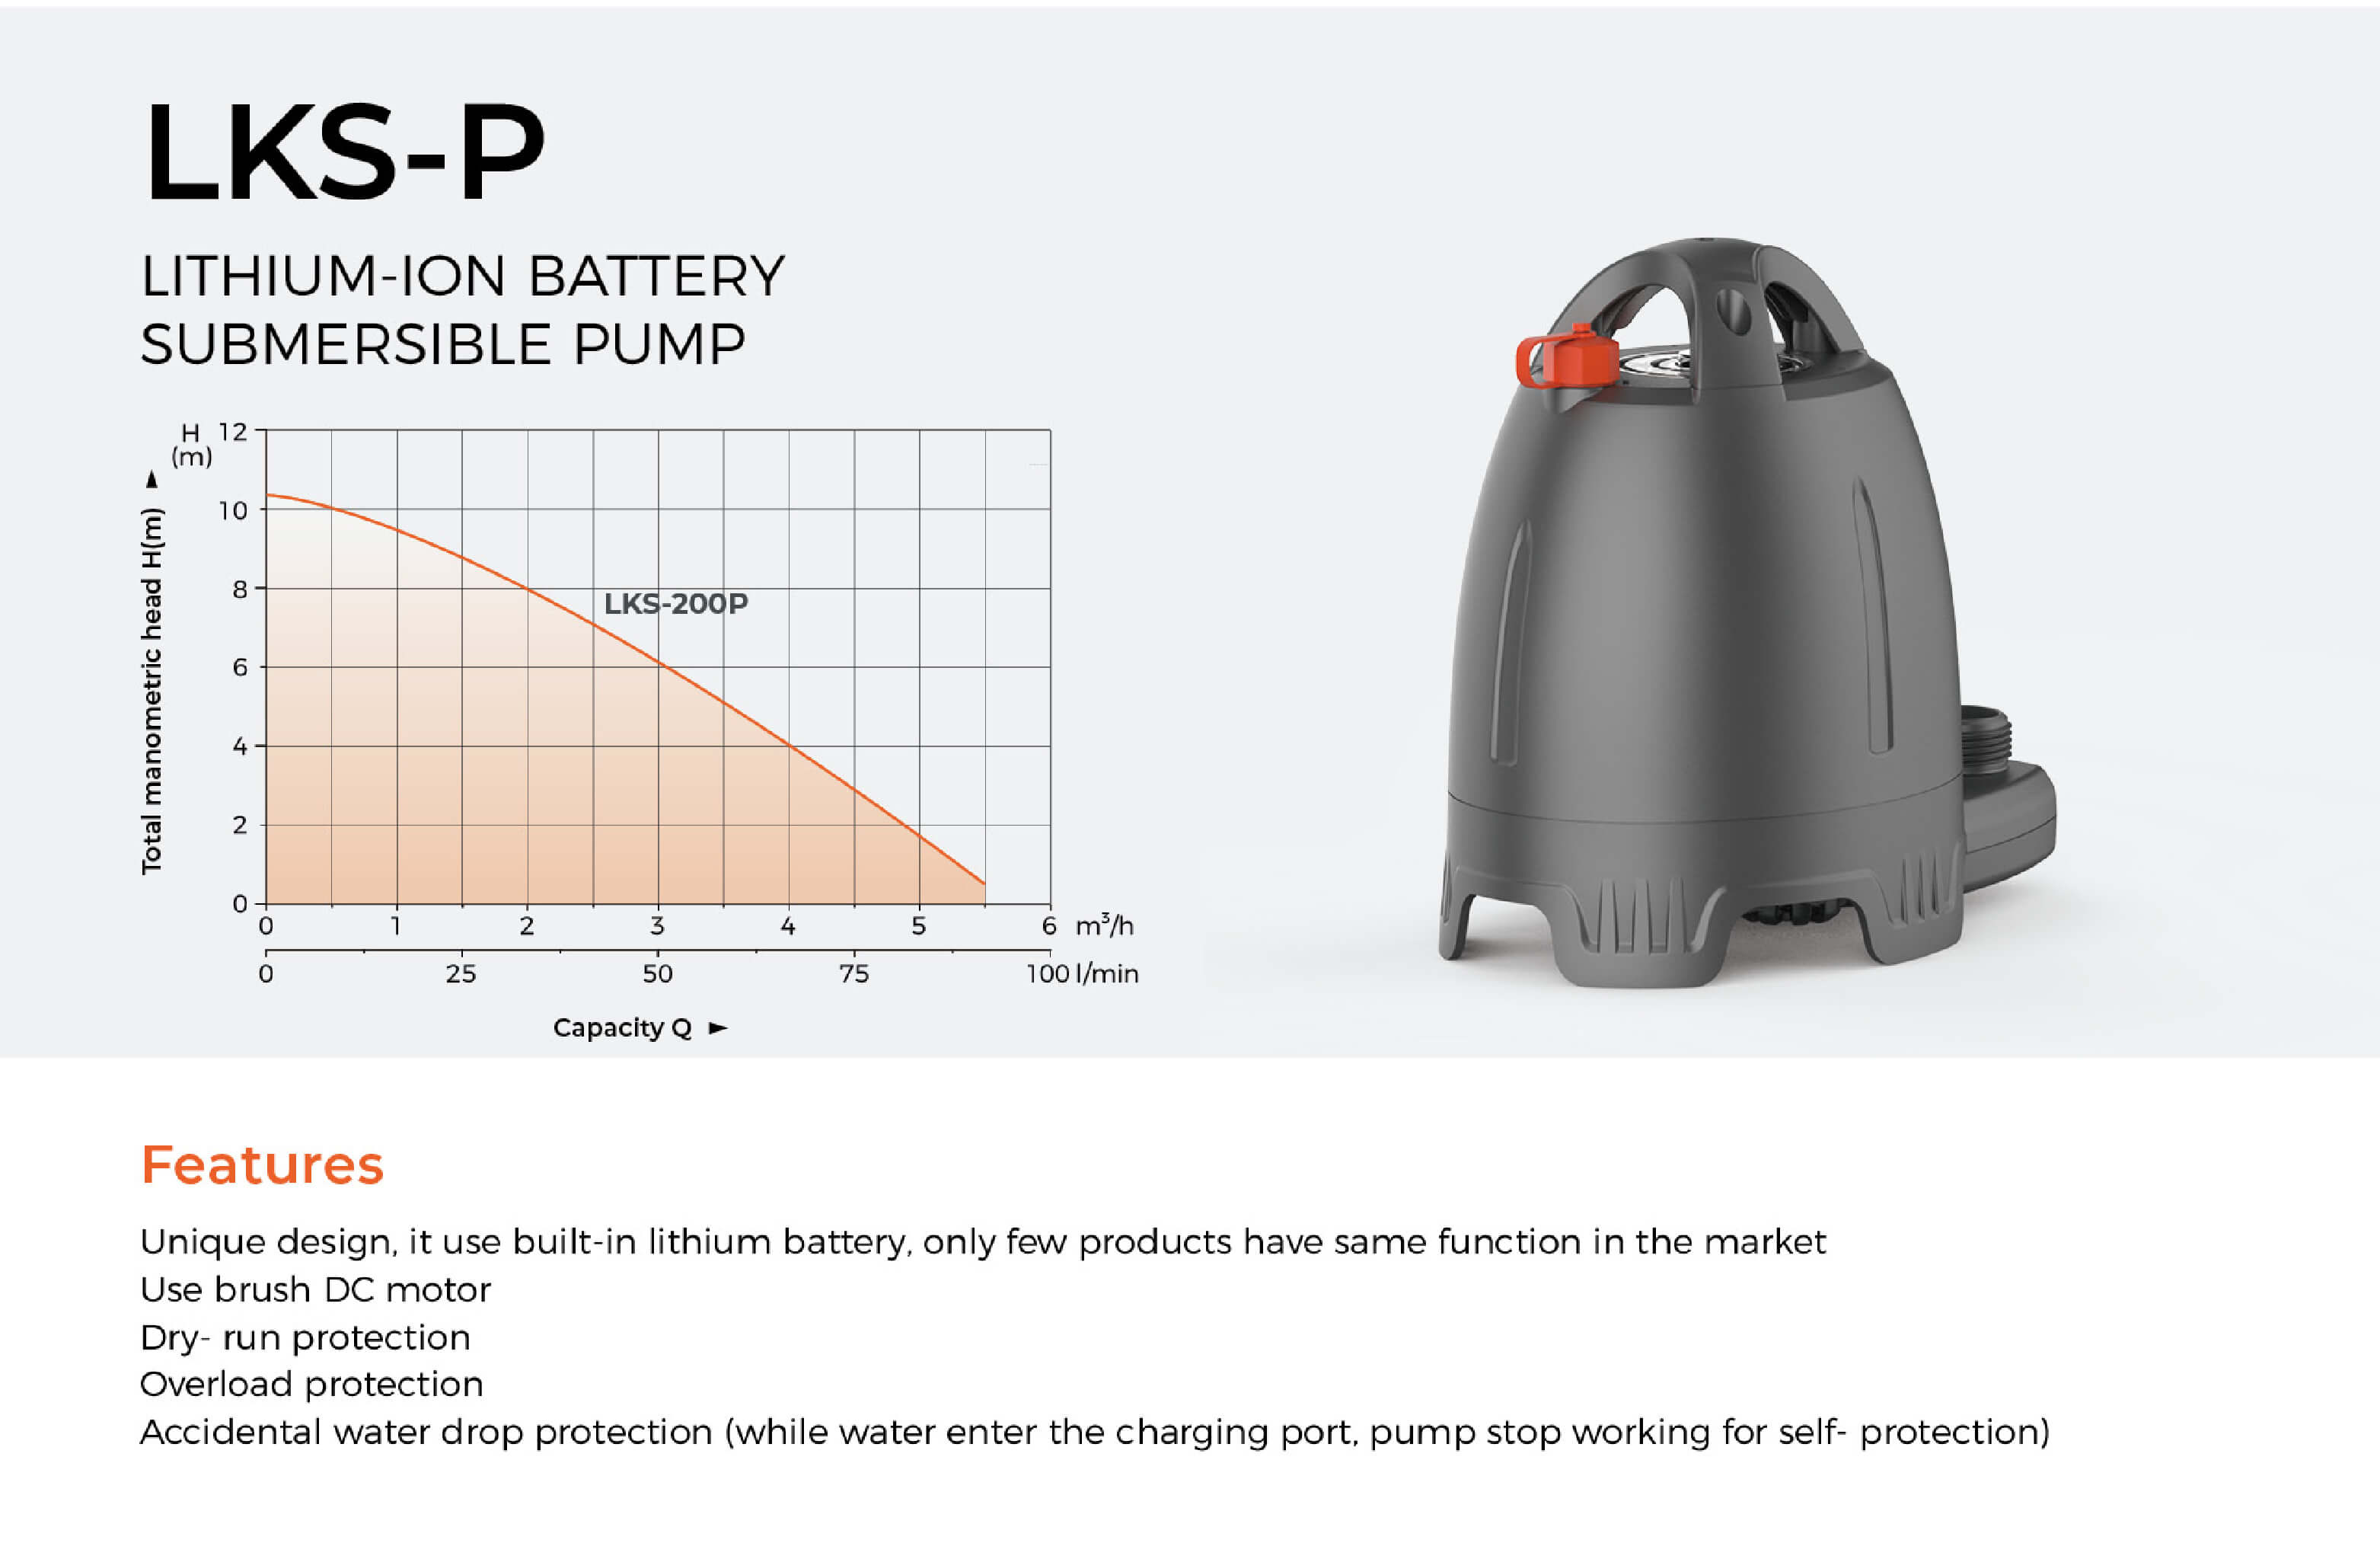 LKS-200P Lithium-ion Battery Submersible Pump Features